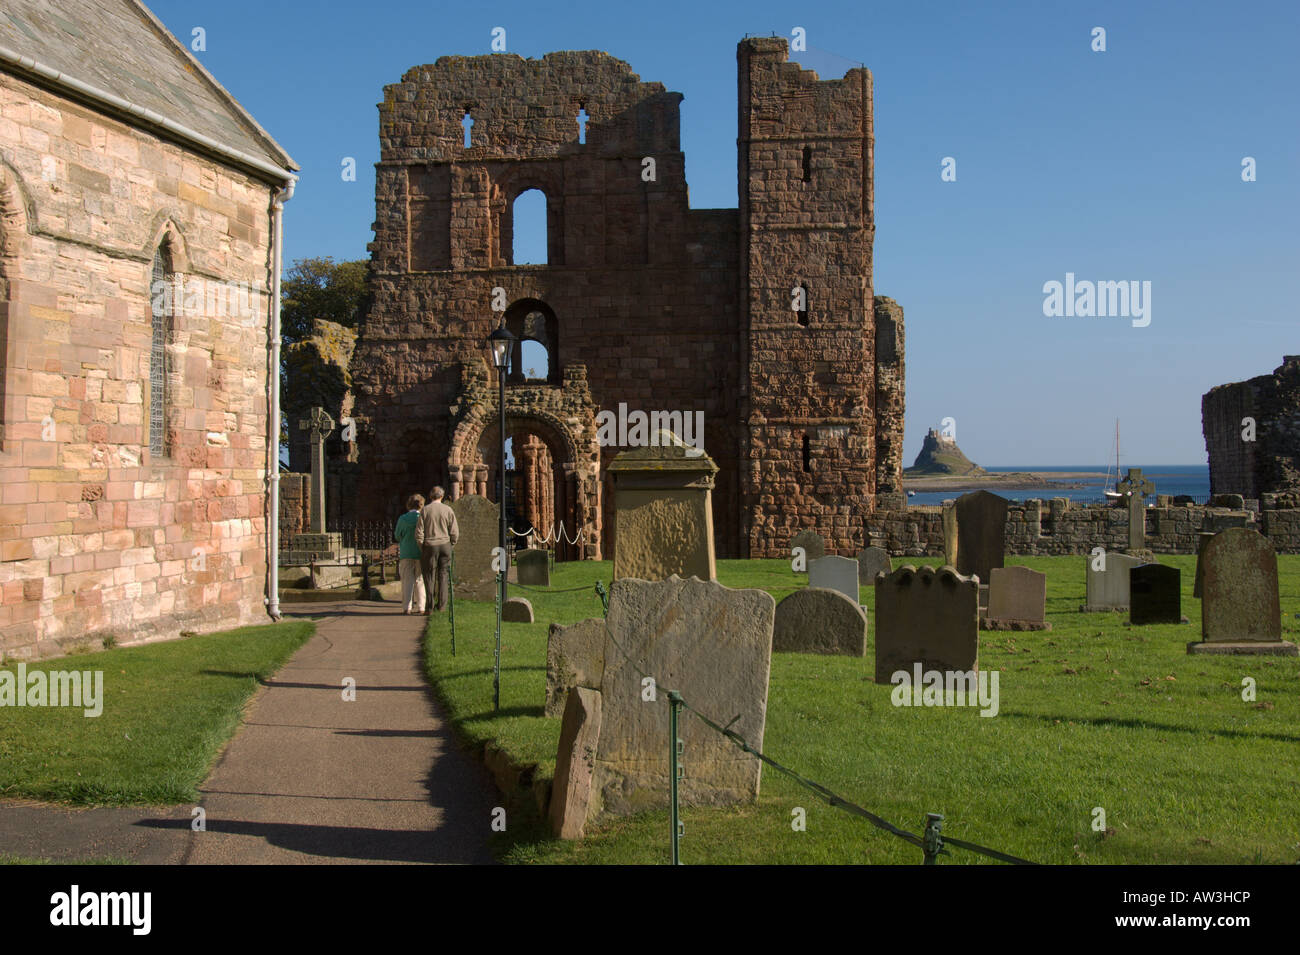 Le Nord de l'Angleterre Northumberland Lindisfarne Priory Octobre 2007 Banque D'Images